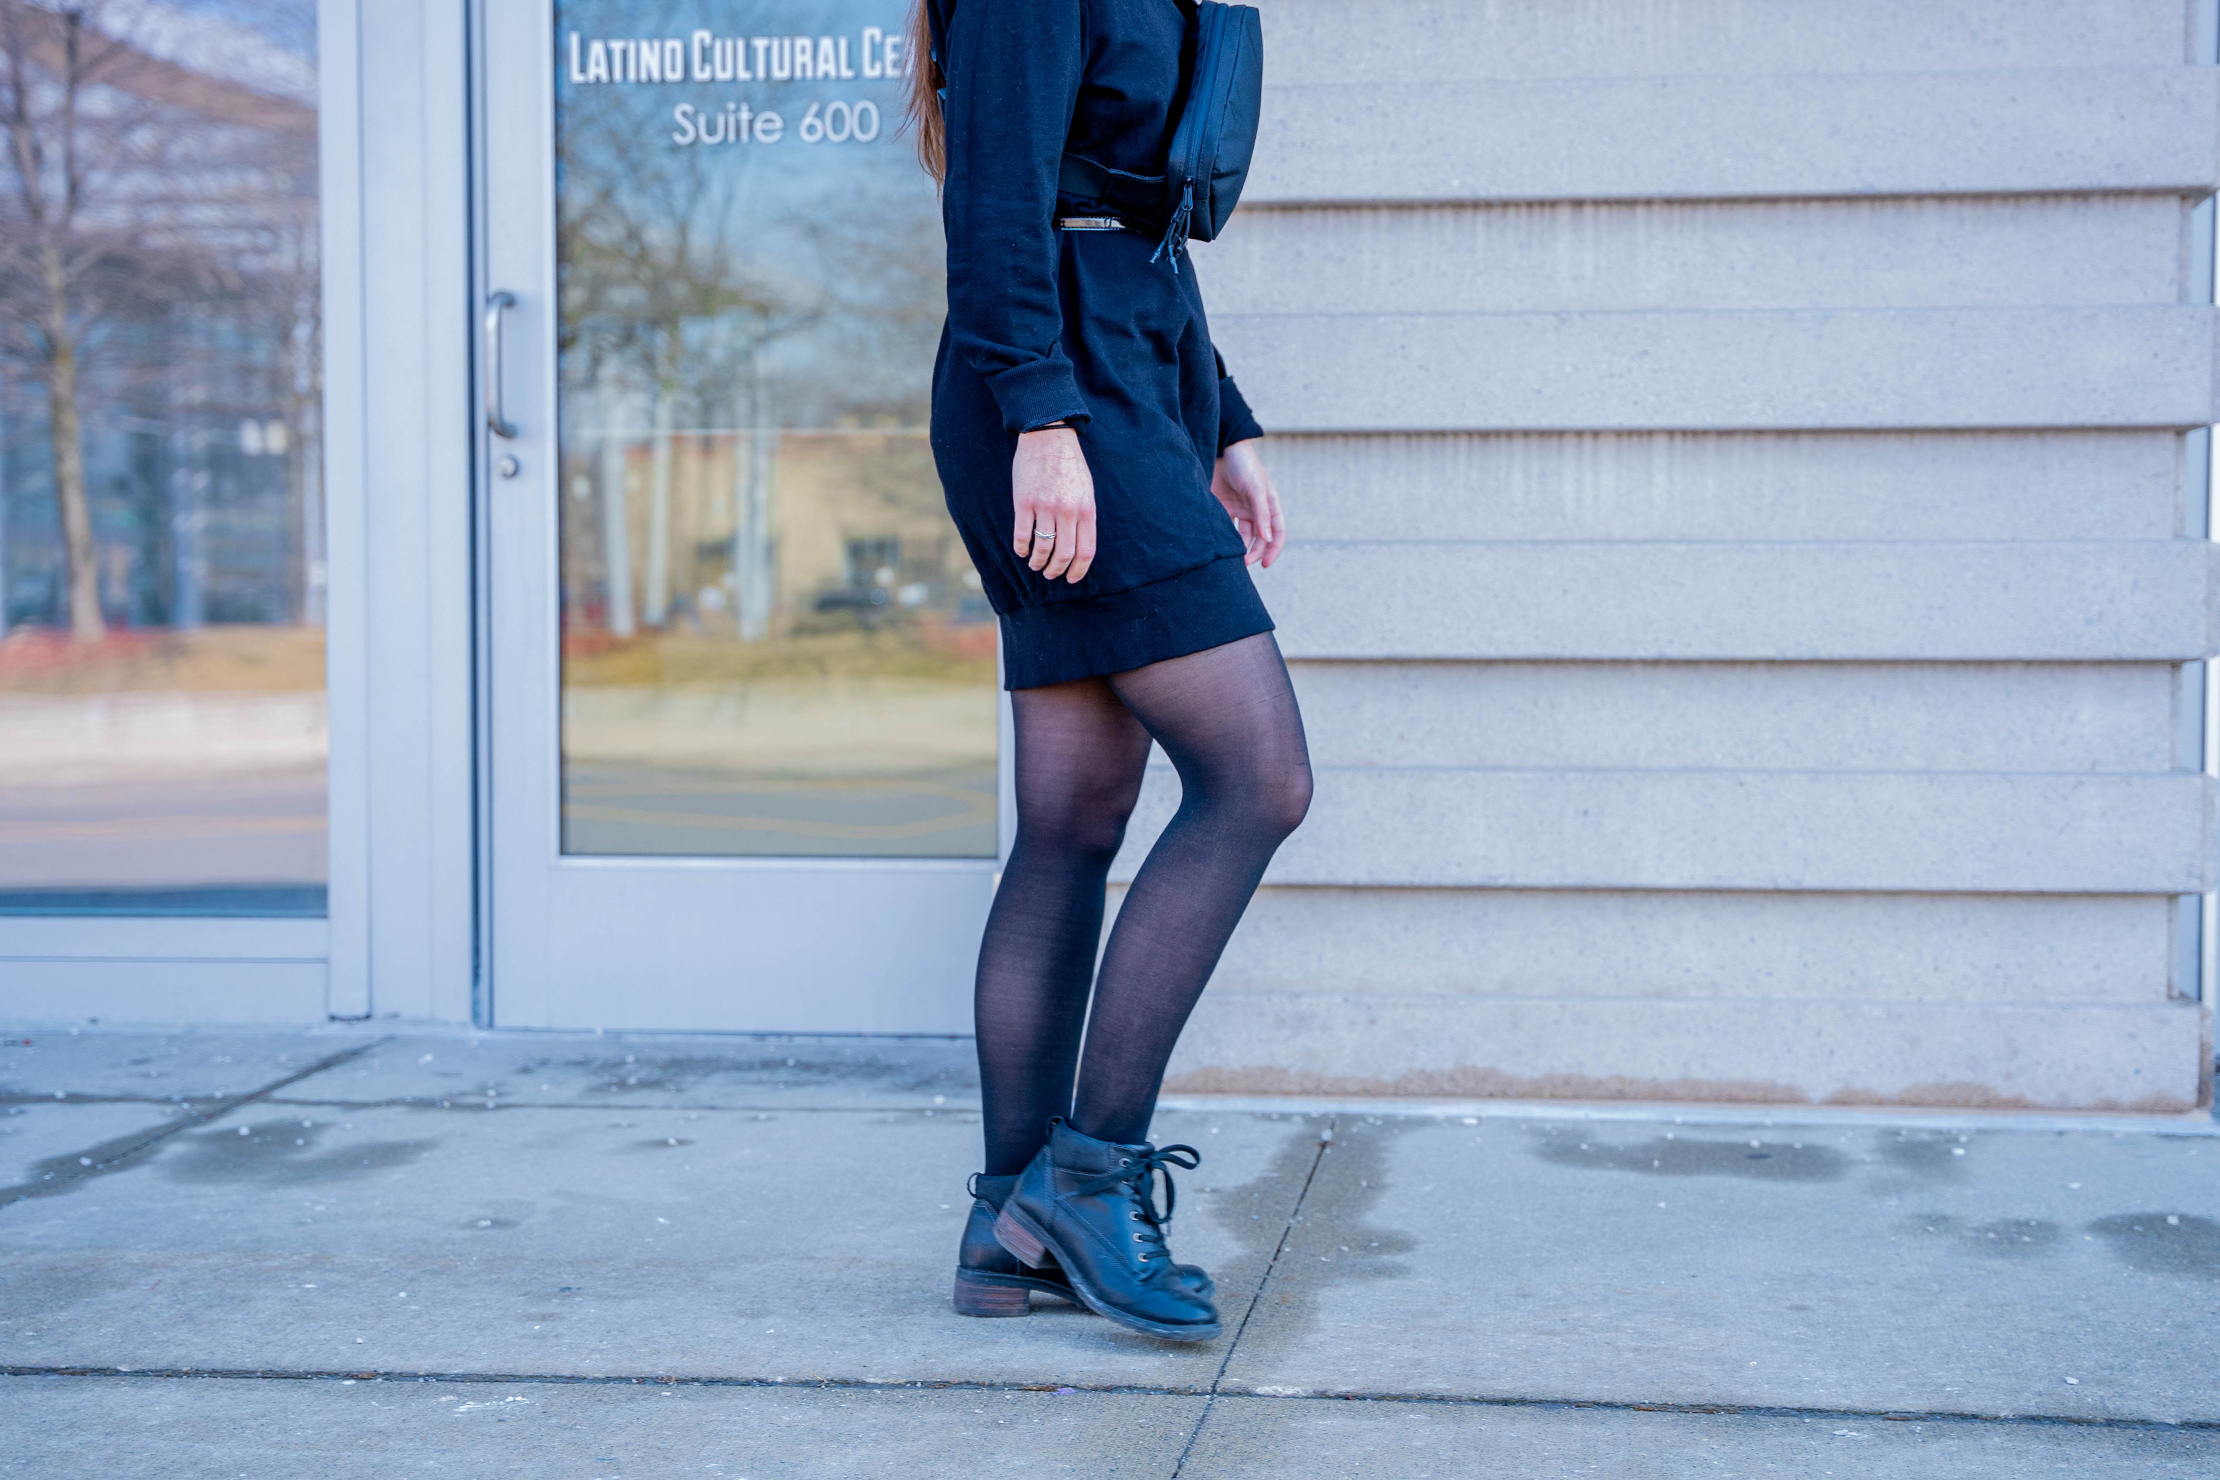 We reviewed Sheertex tights: How durable are they really?